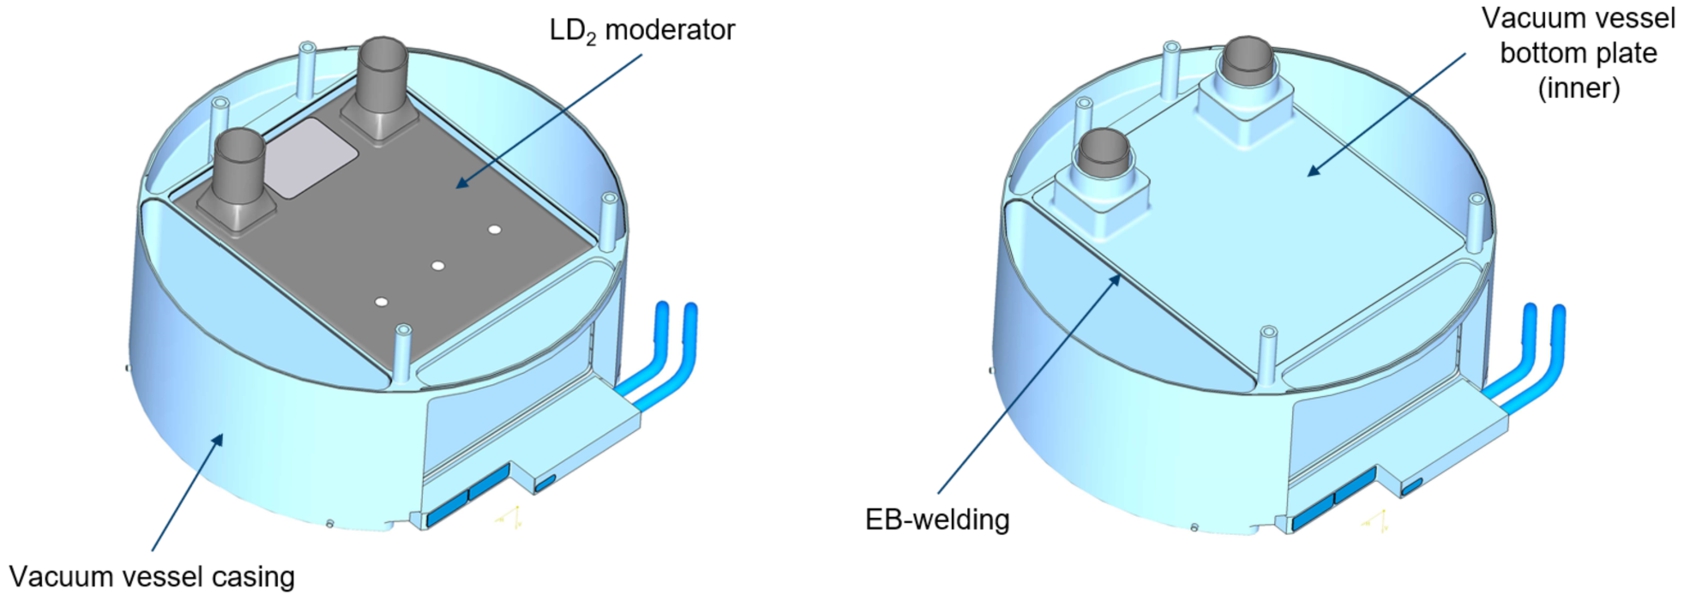 Assembly and EB-welding of the vacuum vessel (inner bottom plate).